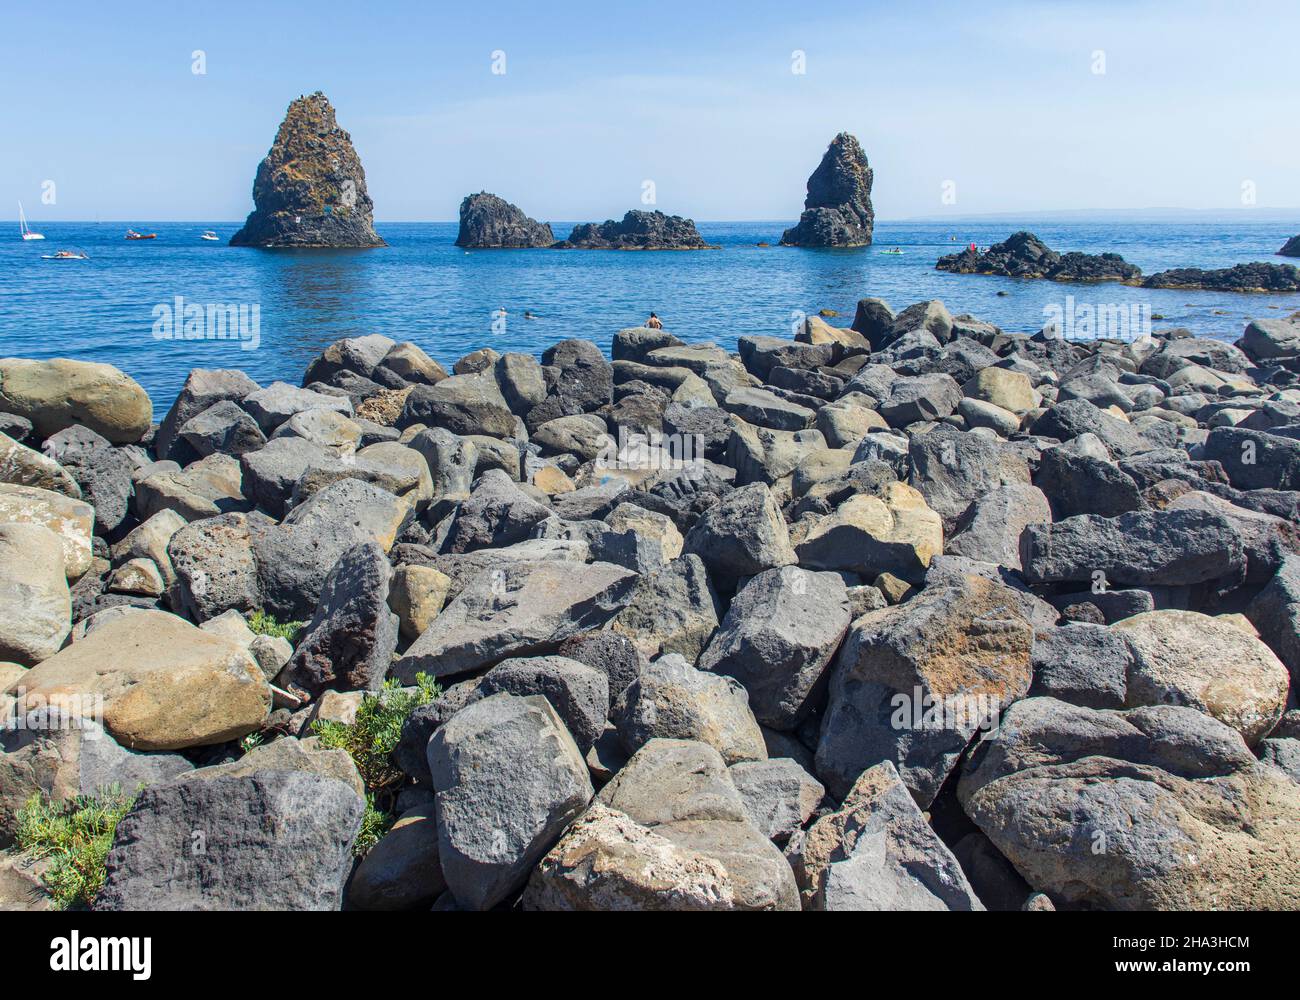 The Ciclopi Islands, located in front of the coast of Acitrezza, are a small archipelago of Sicily, in Italy. Stock Photo